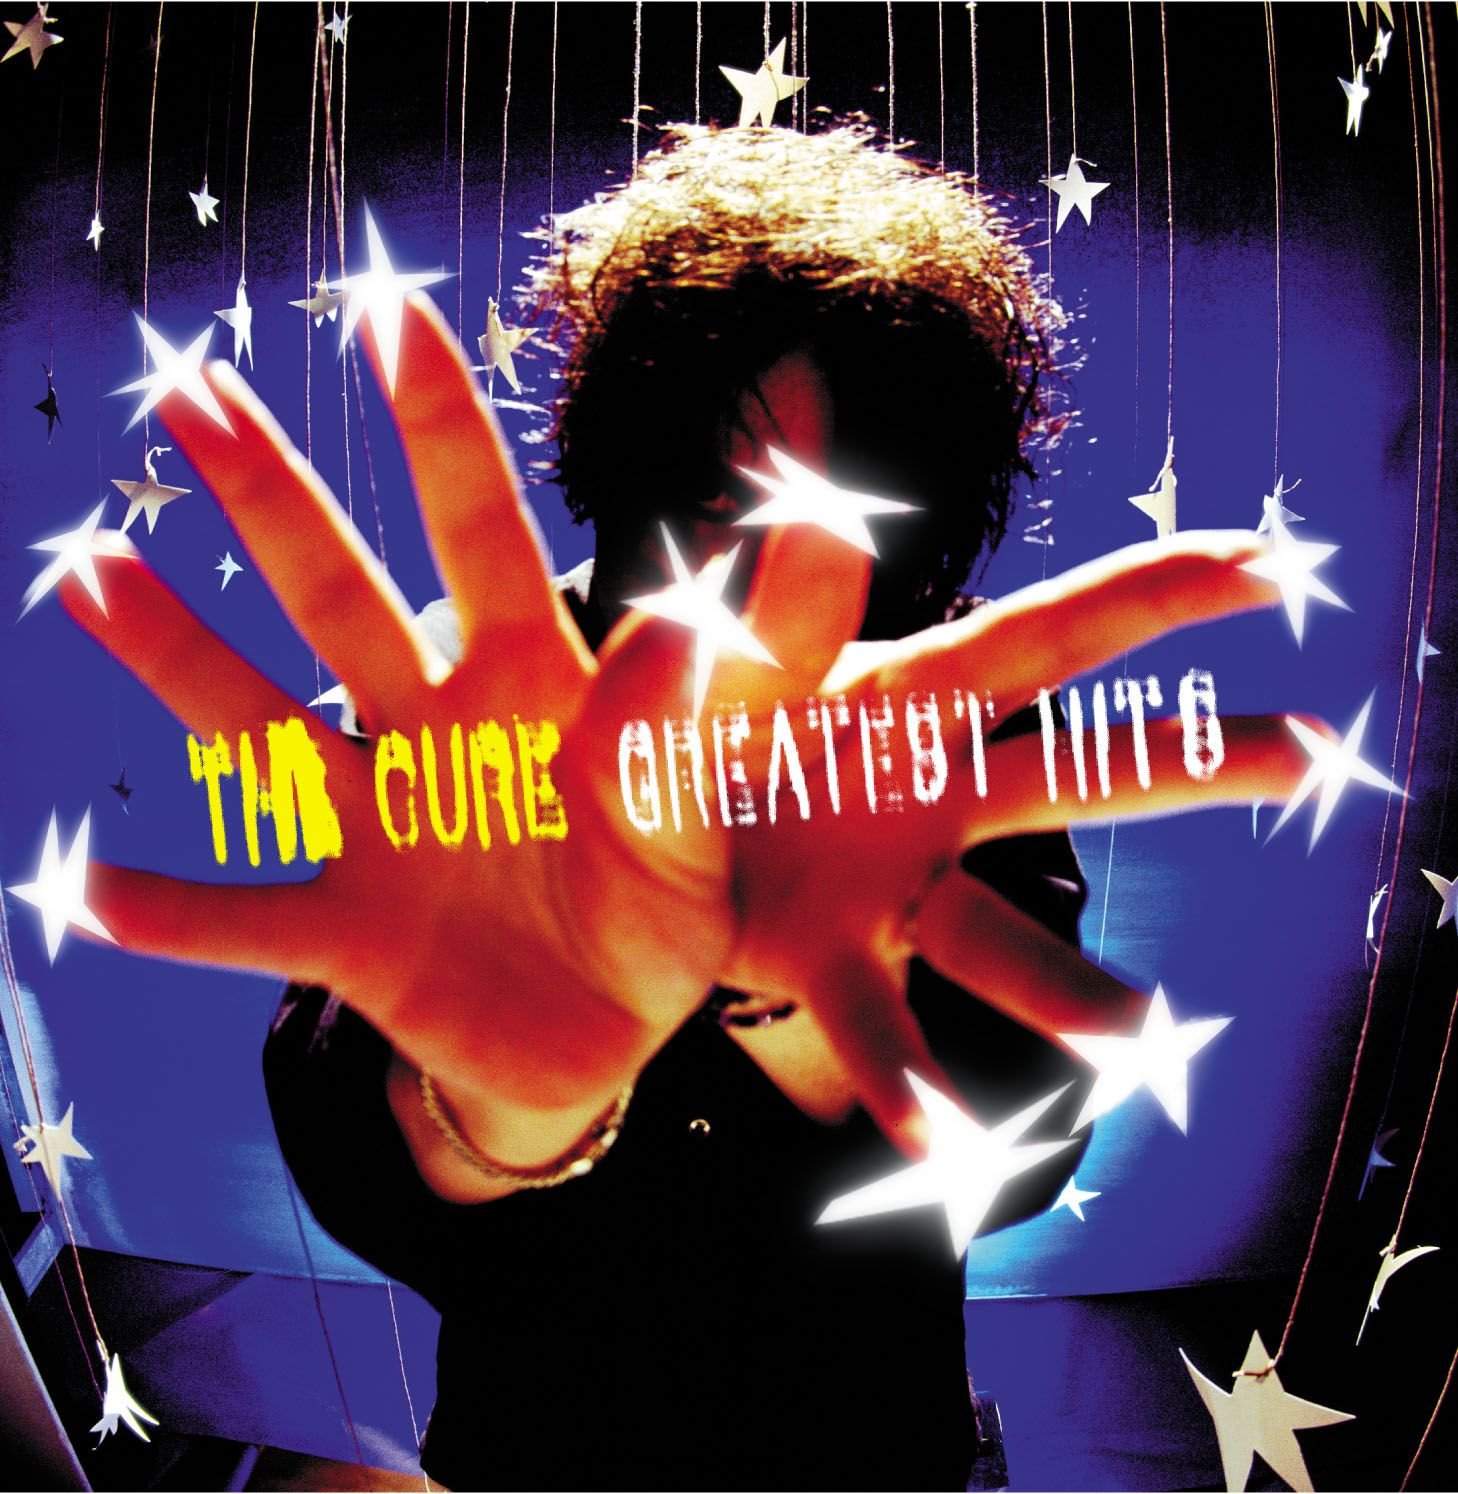 The Cure "Greatest Hits" 2LP